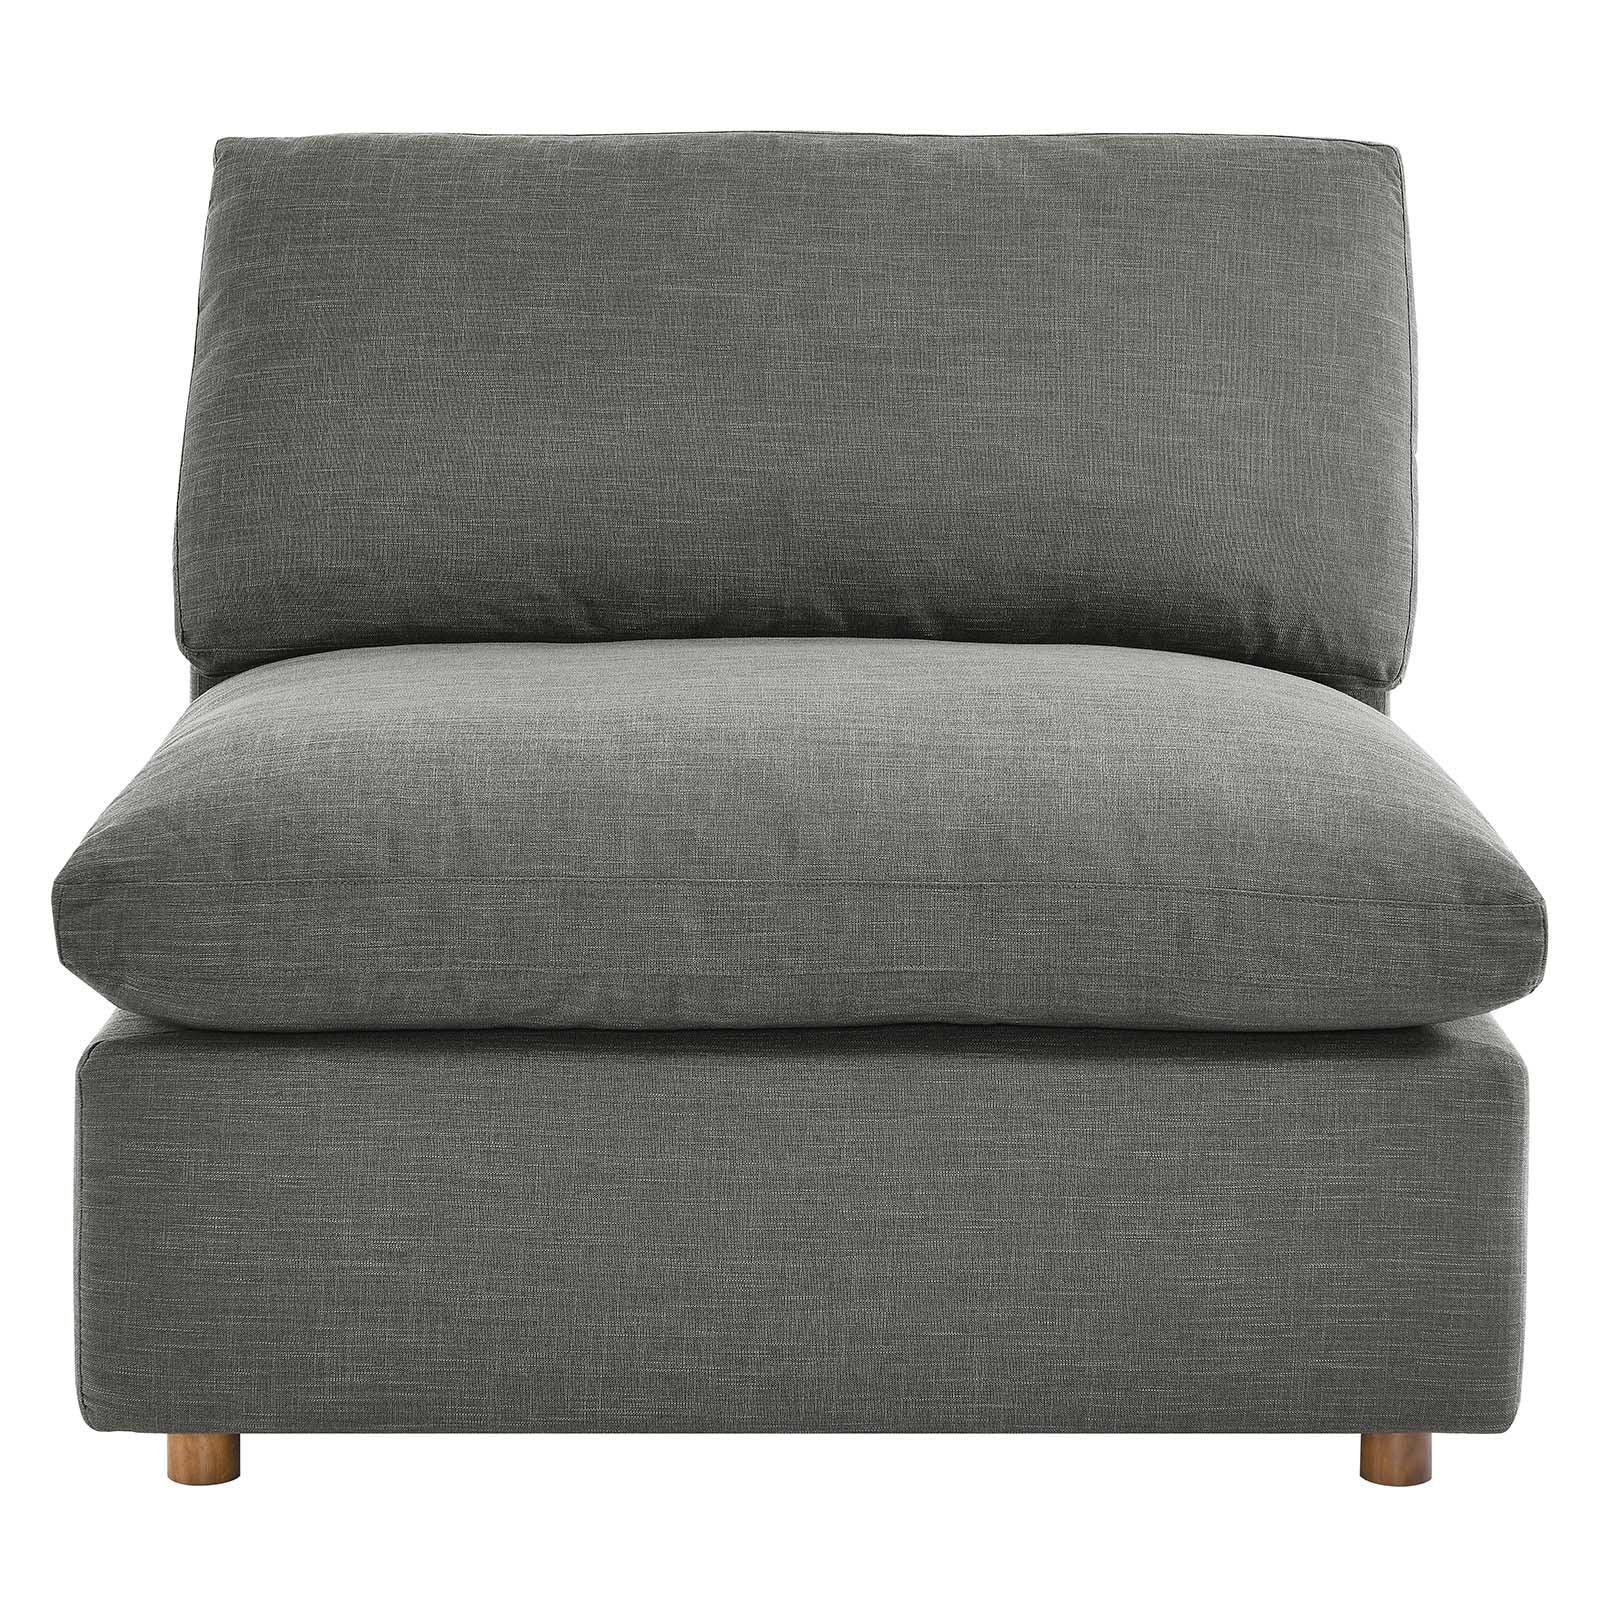 Modway Accent Chairs - Commix Down Filled Overstuffed Armless Chair Gray